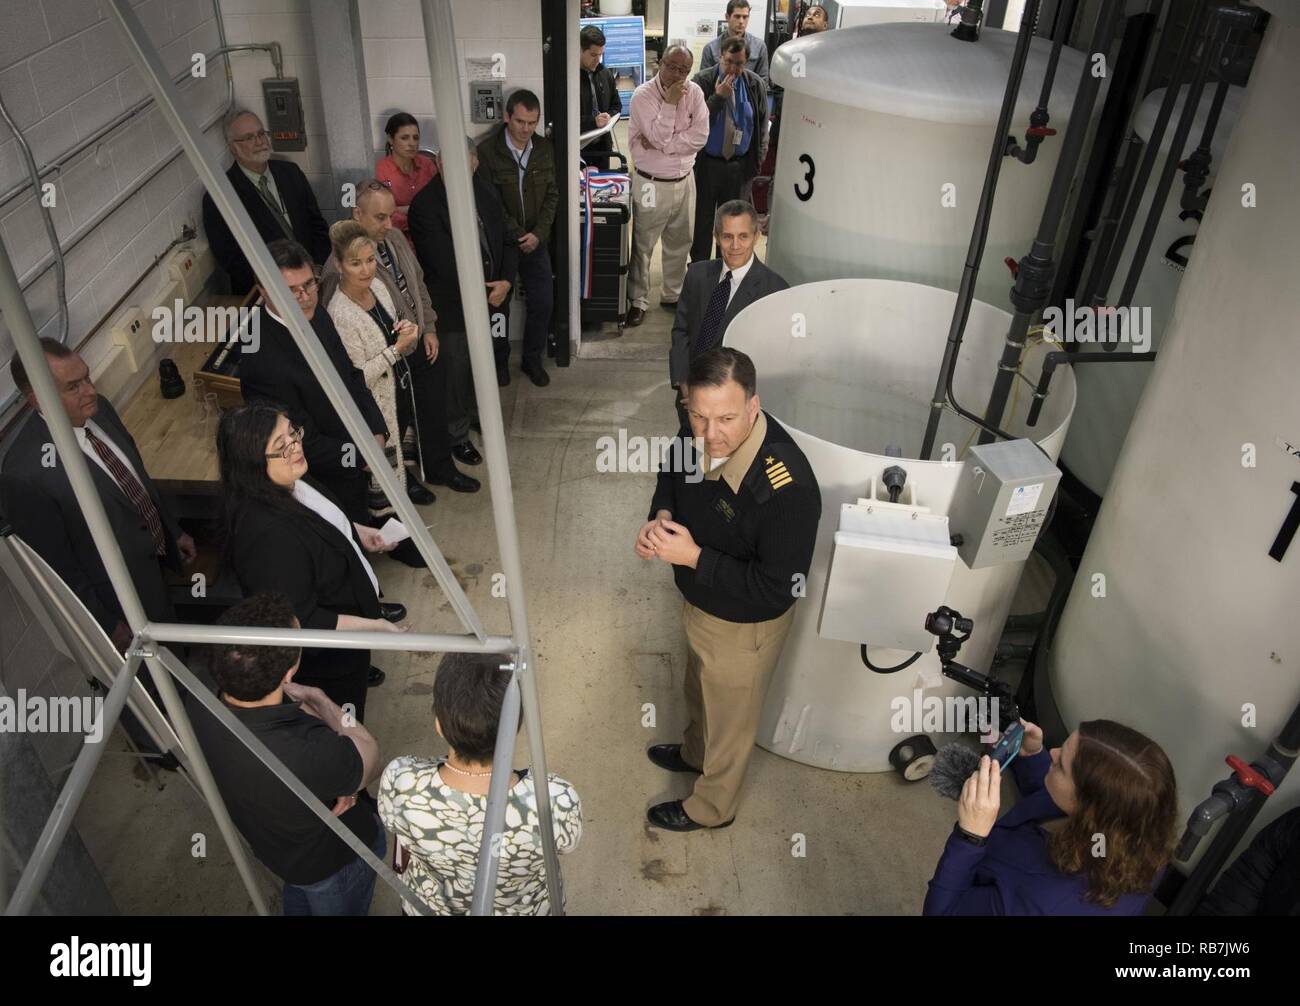 Naval Surface Warfare Center Carderock Division Carderock Division Commanding Officer Capt. Mark Vandroff addresses employees along with Technical Director Dr. Tim Arcano, during the official opening of the new Ballast Water Research Lab in West Bethesda, Md., Dec. 5, 2016. Stock Photo